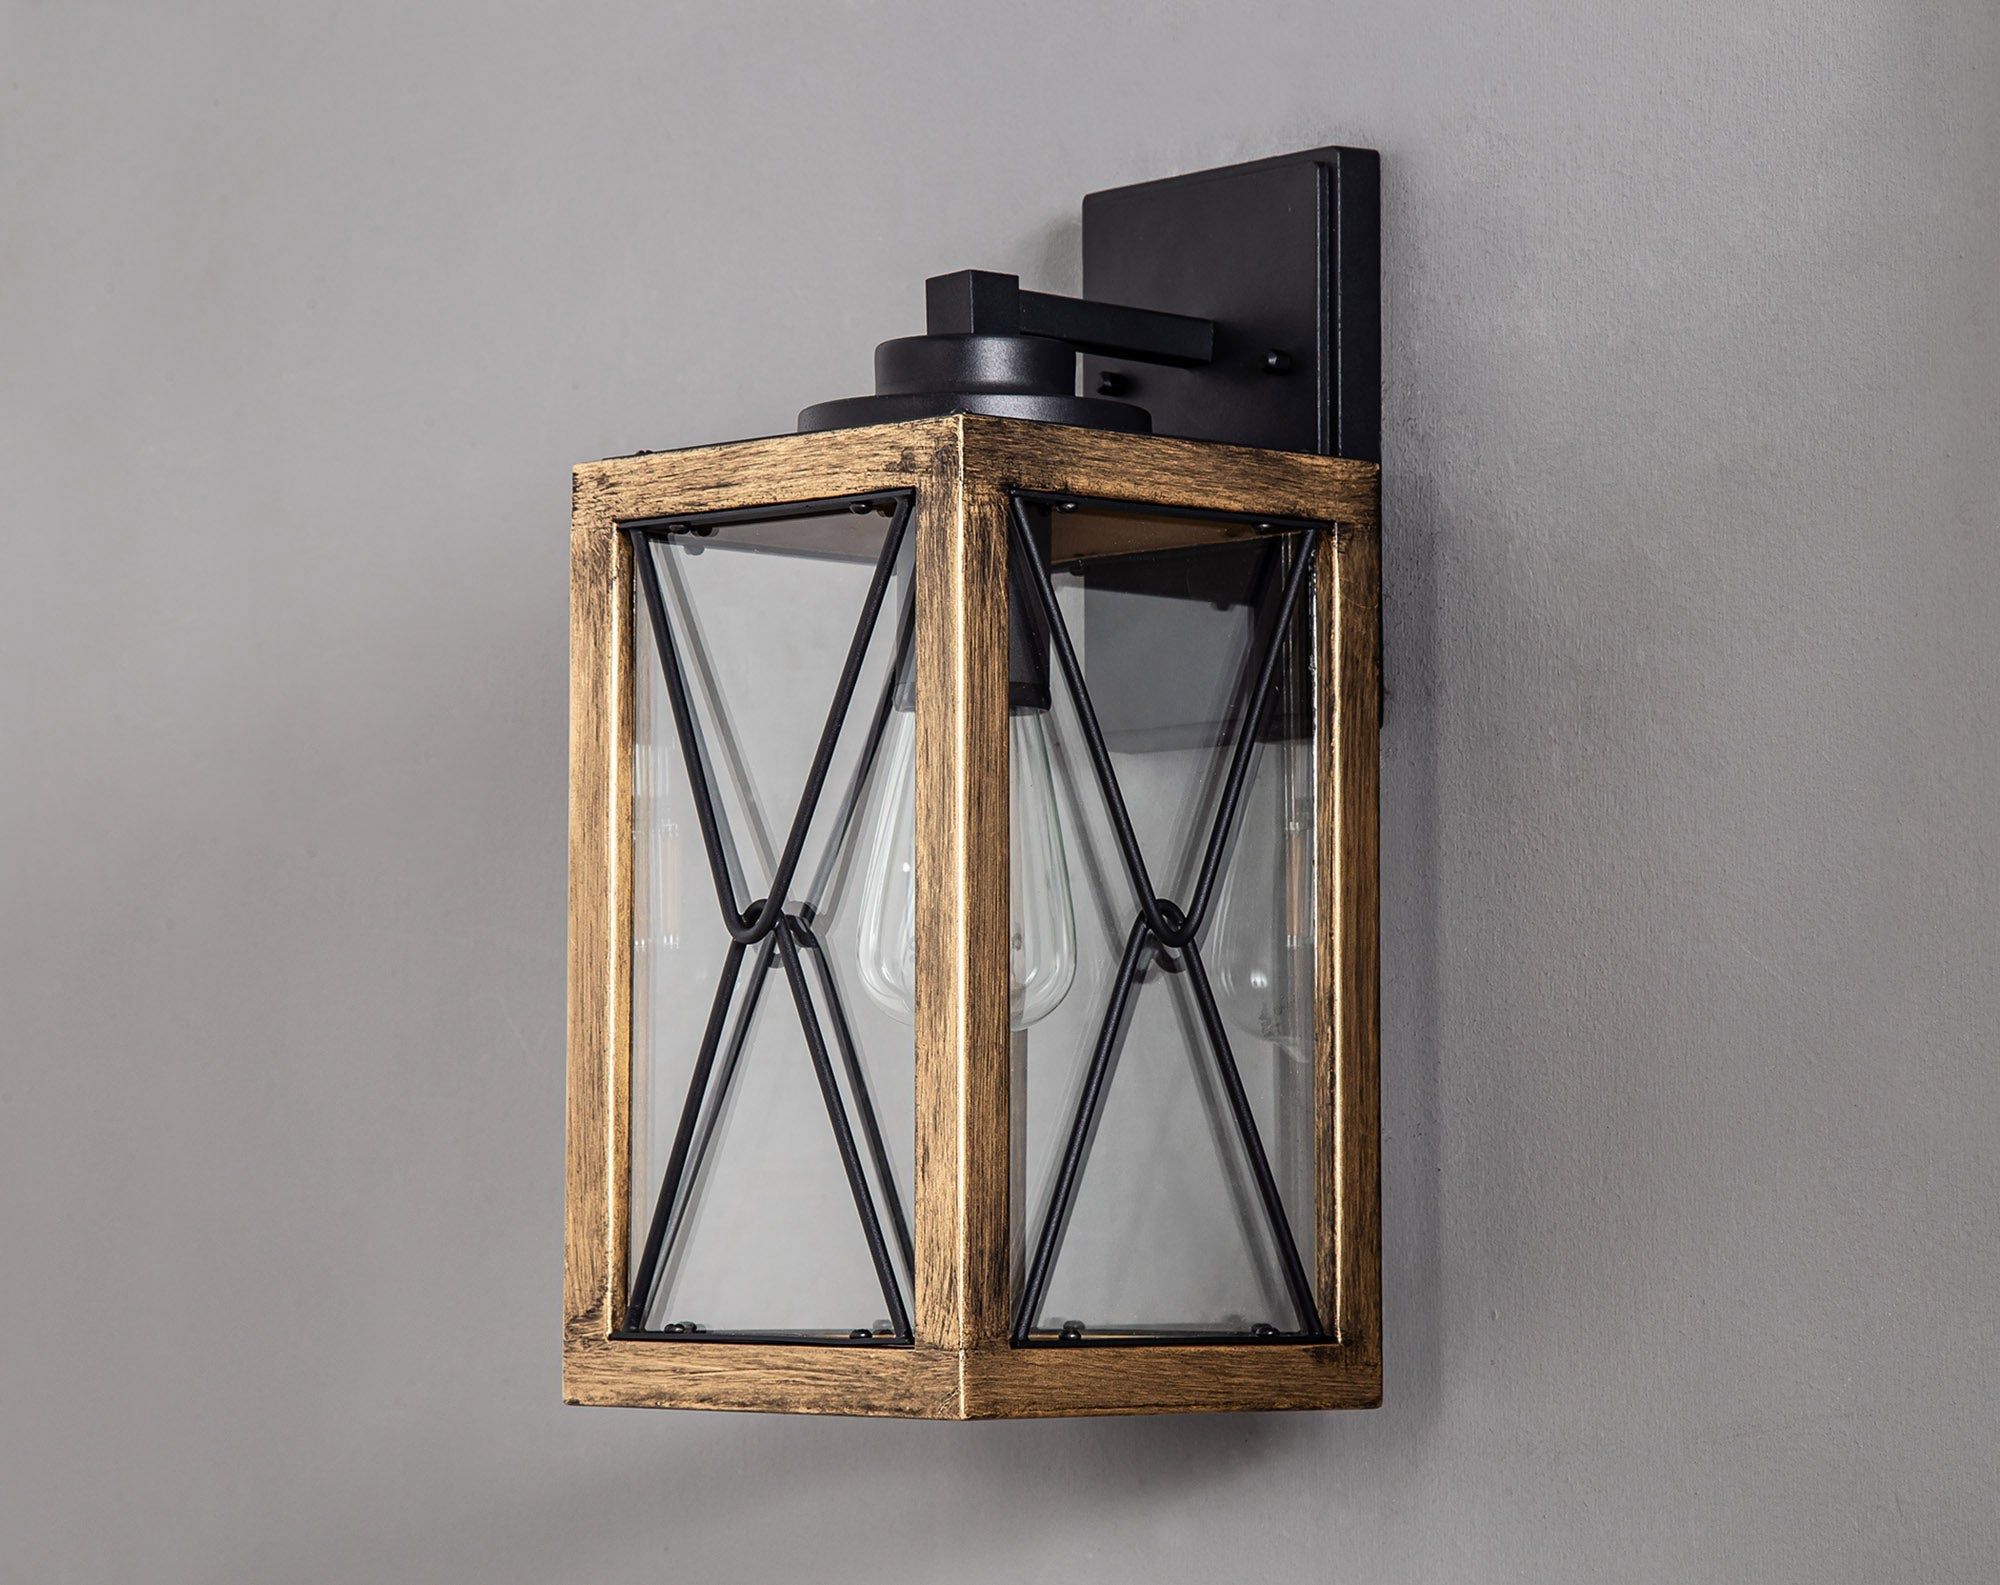 Beait Large/Small Wall Lamp, Wood Effect & Black/Clear Glass, IP54, 2yrs Warranty